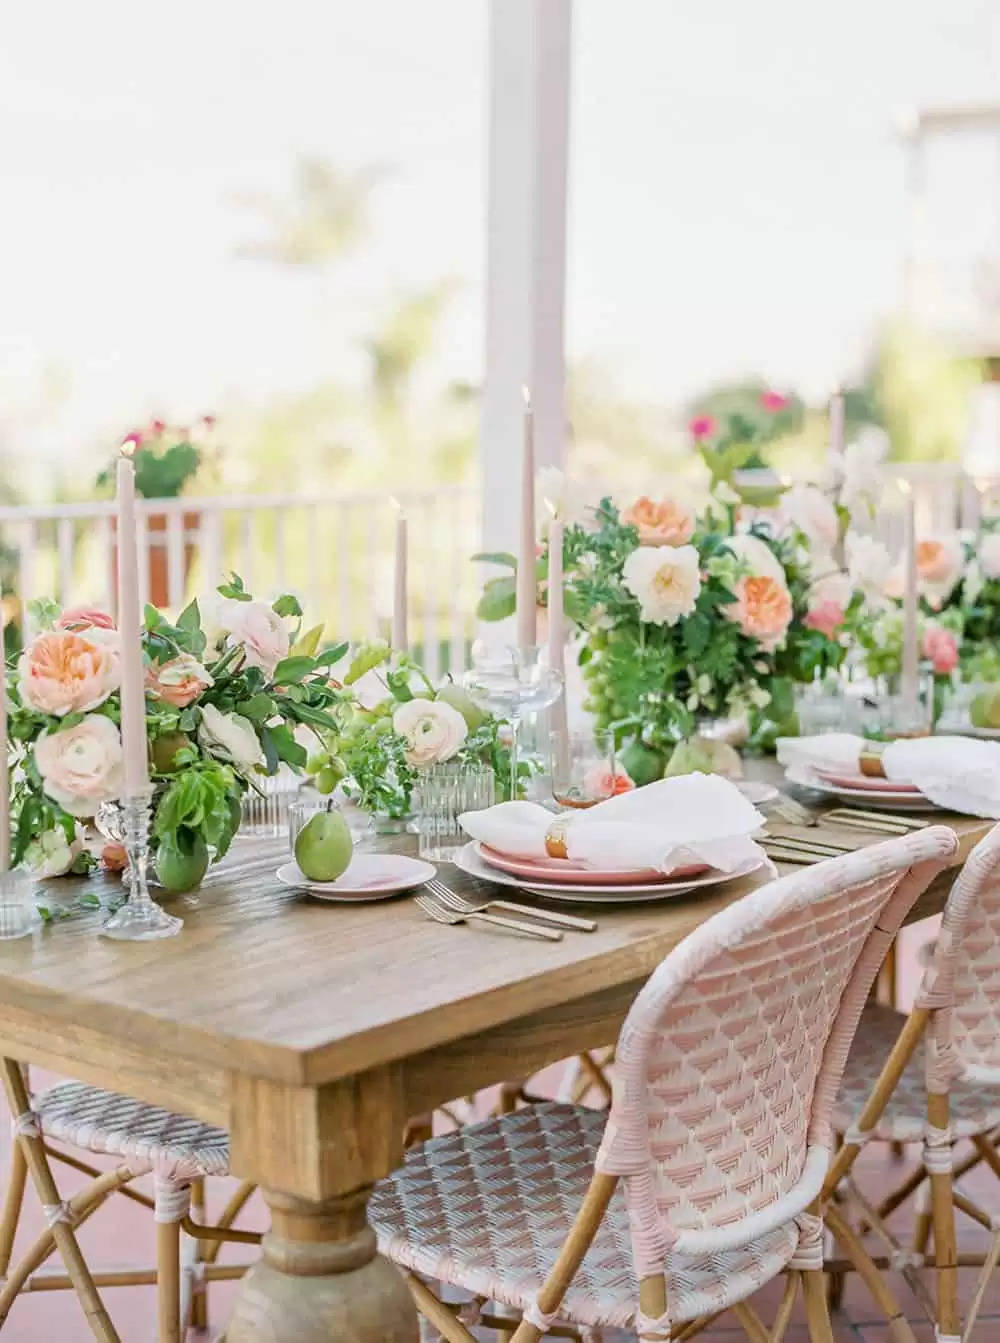 Intimate La Valencia Resort Marriage ceremony Editorial with a Backyard Luxe Really feel ⋆ Ruffled